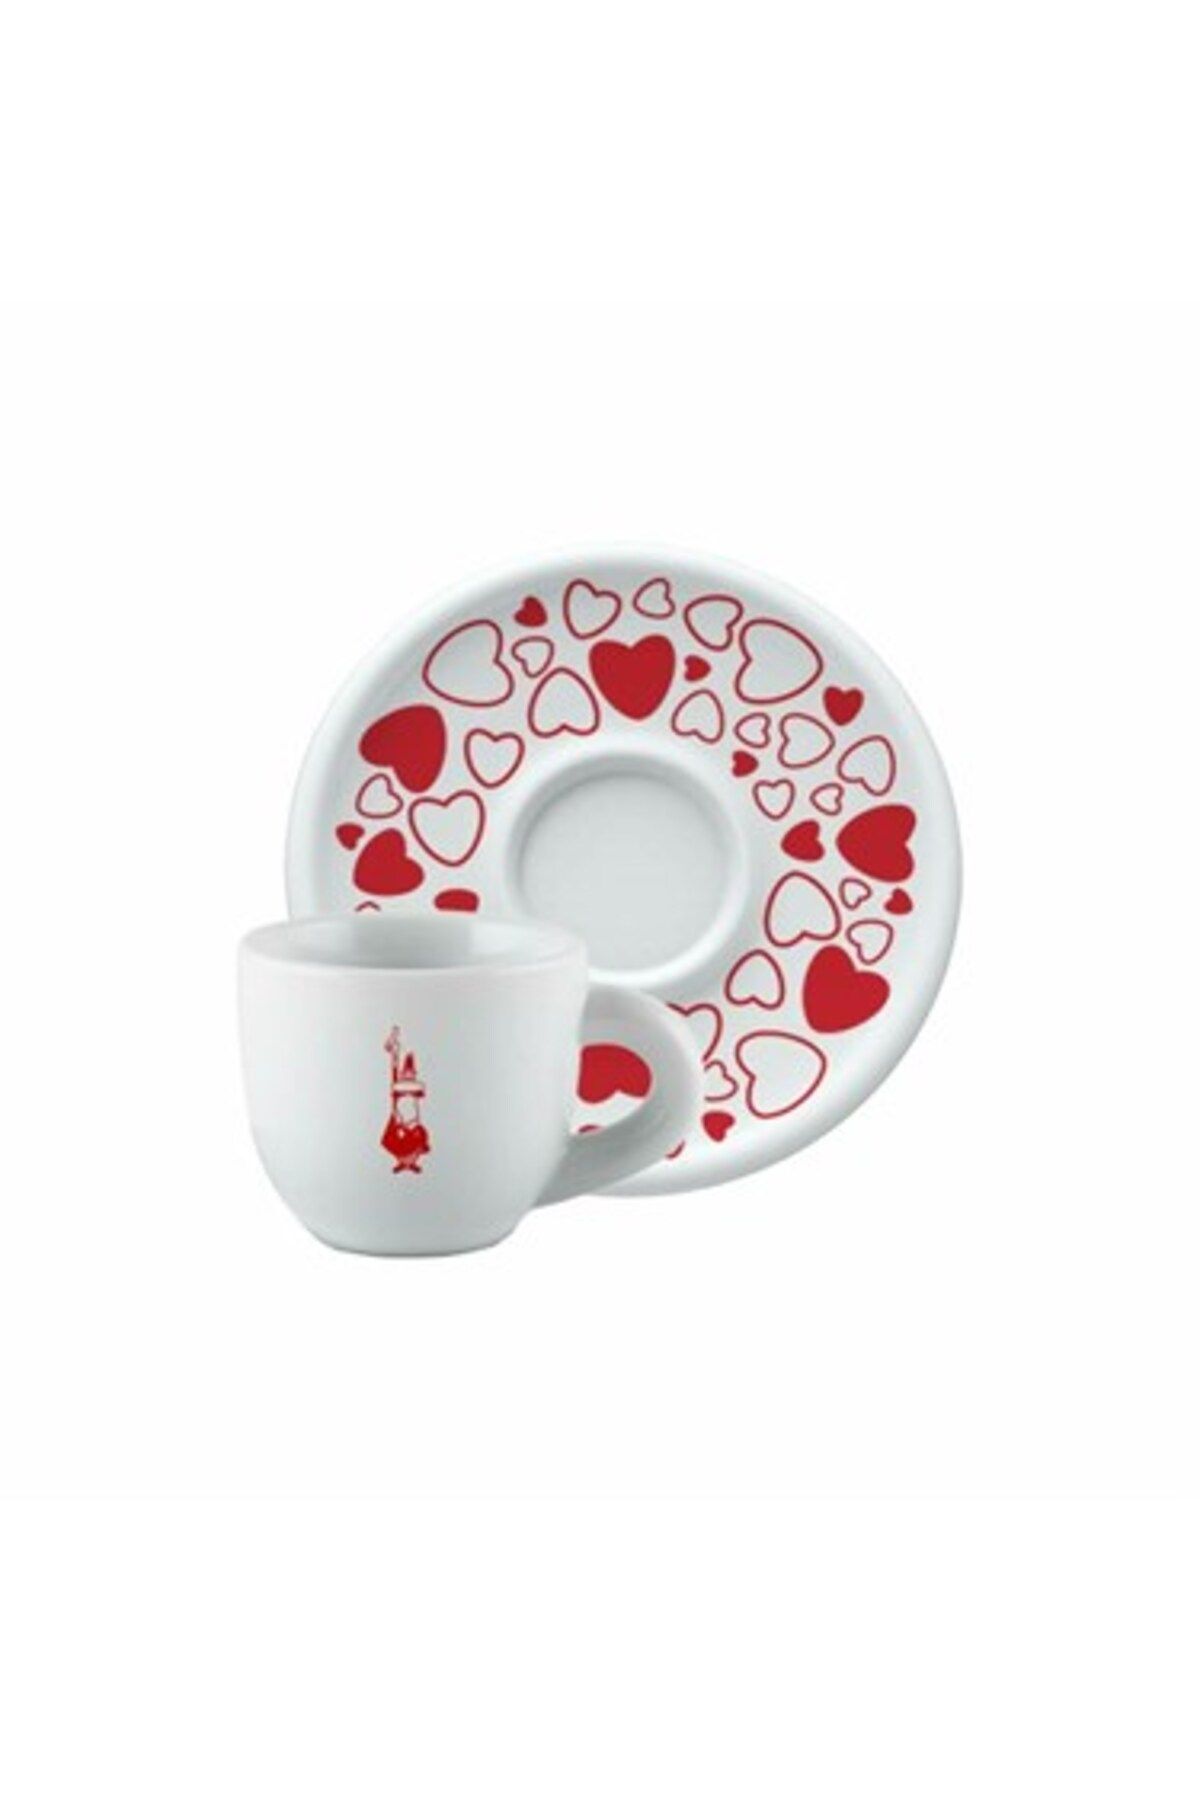 Bialetti Y0tz100 Cappuccino Cup White And Red